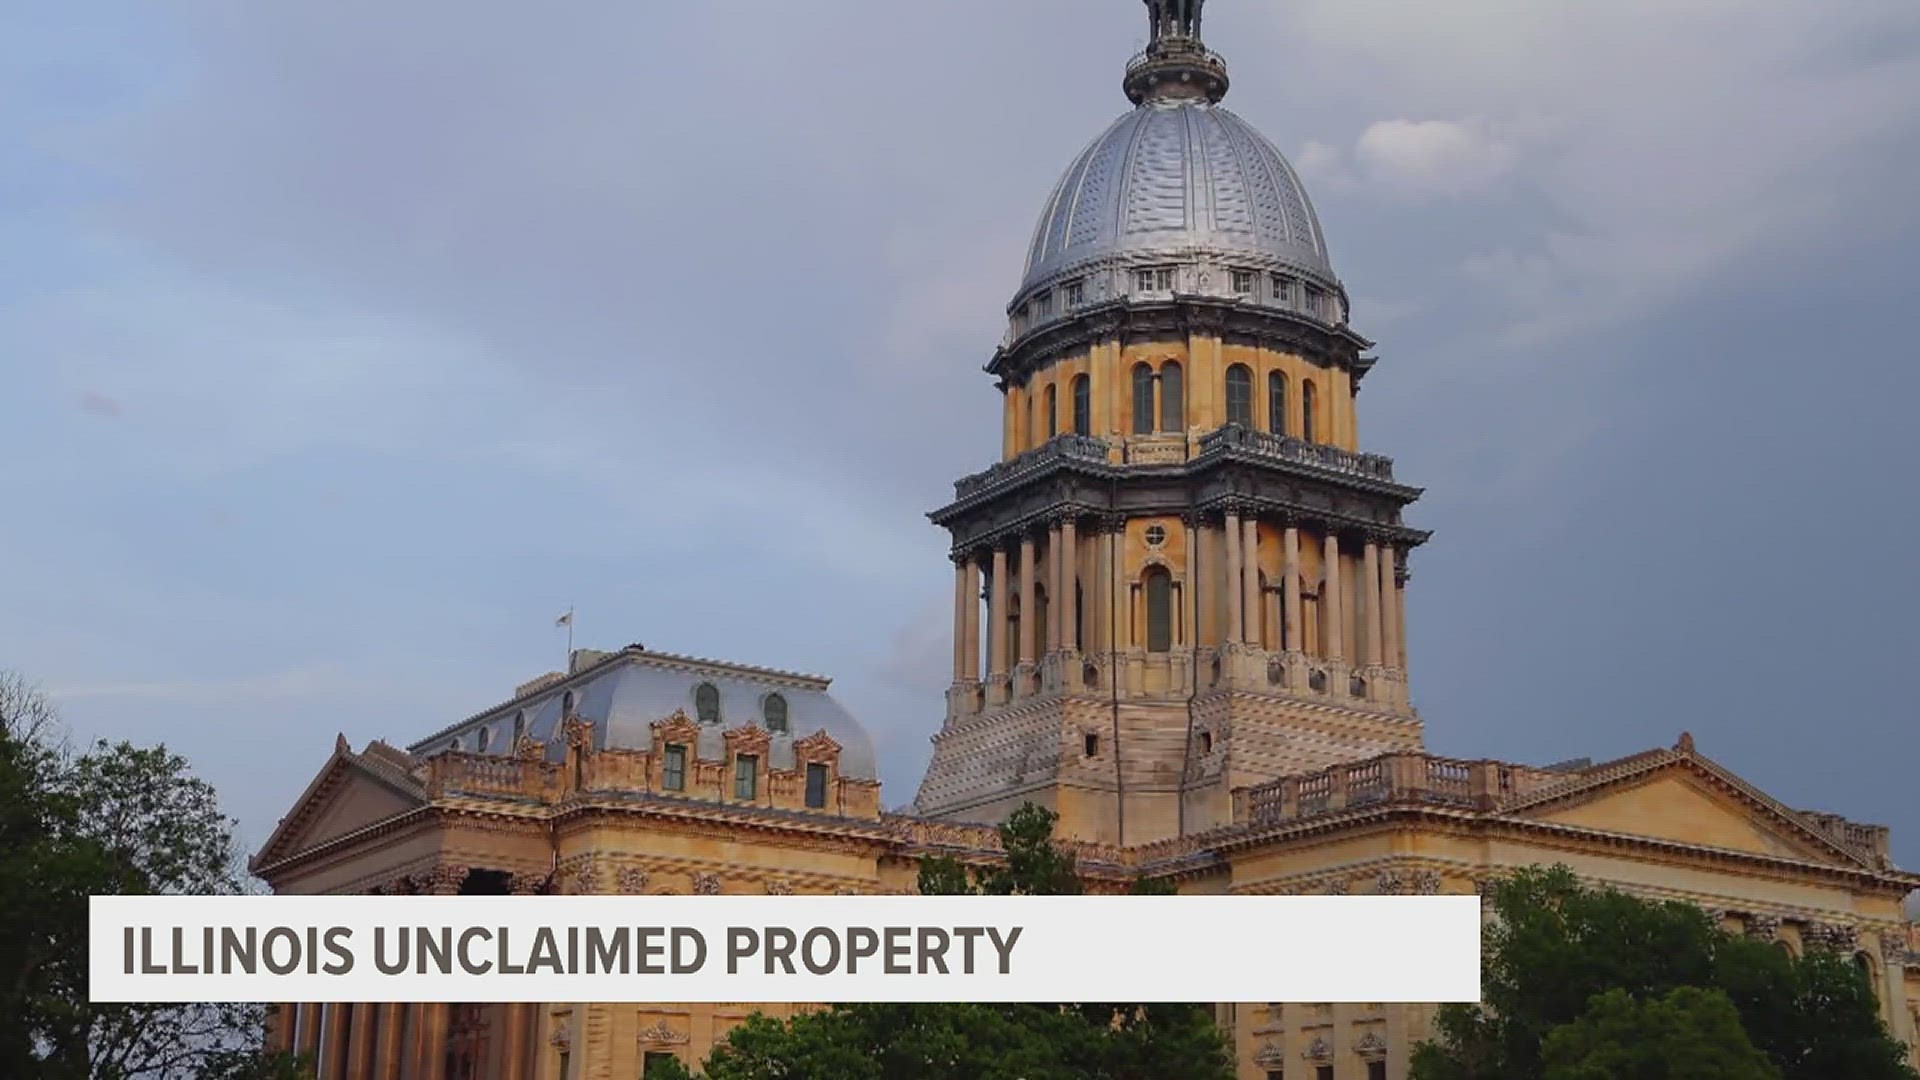 The Money Match program will give money back to Illinoisans through unclaimed property funds.